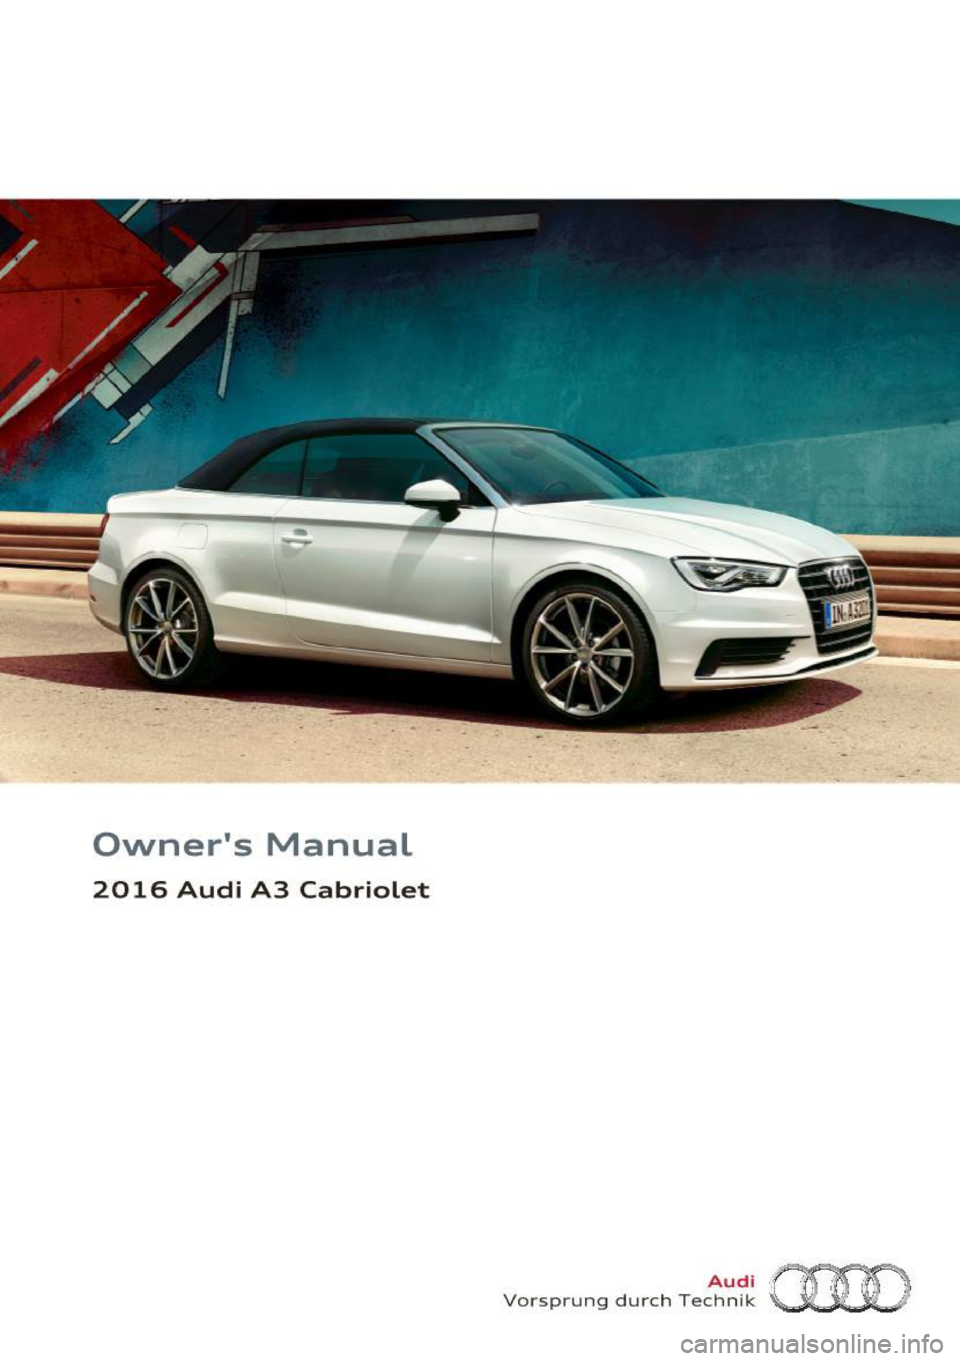 AUDI A3 CABRIOLET 2016  Owners Manual 